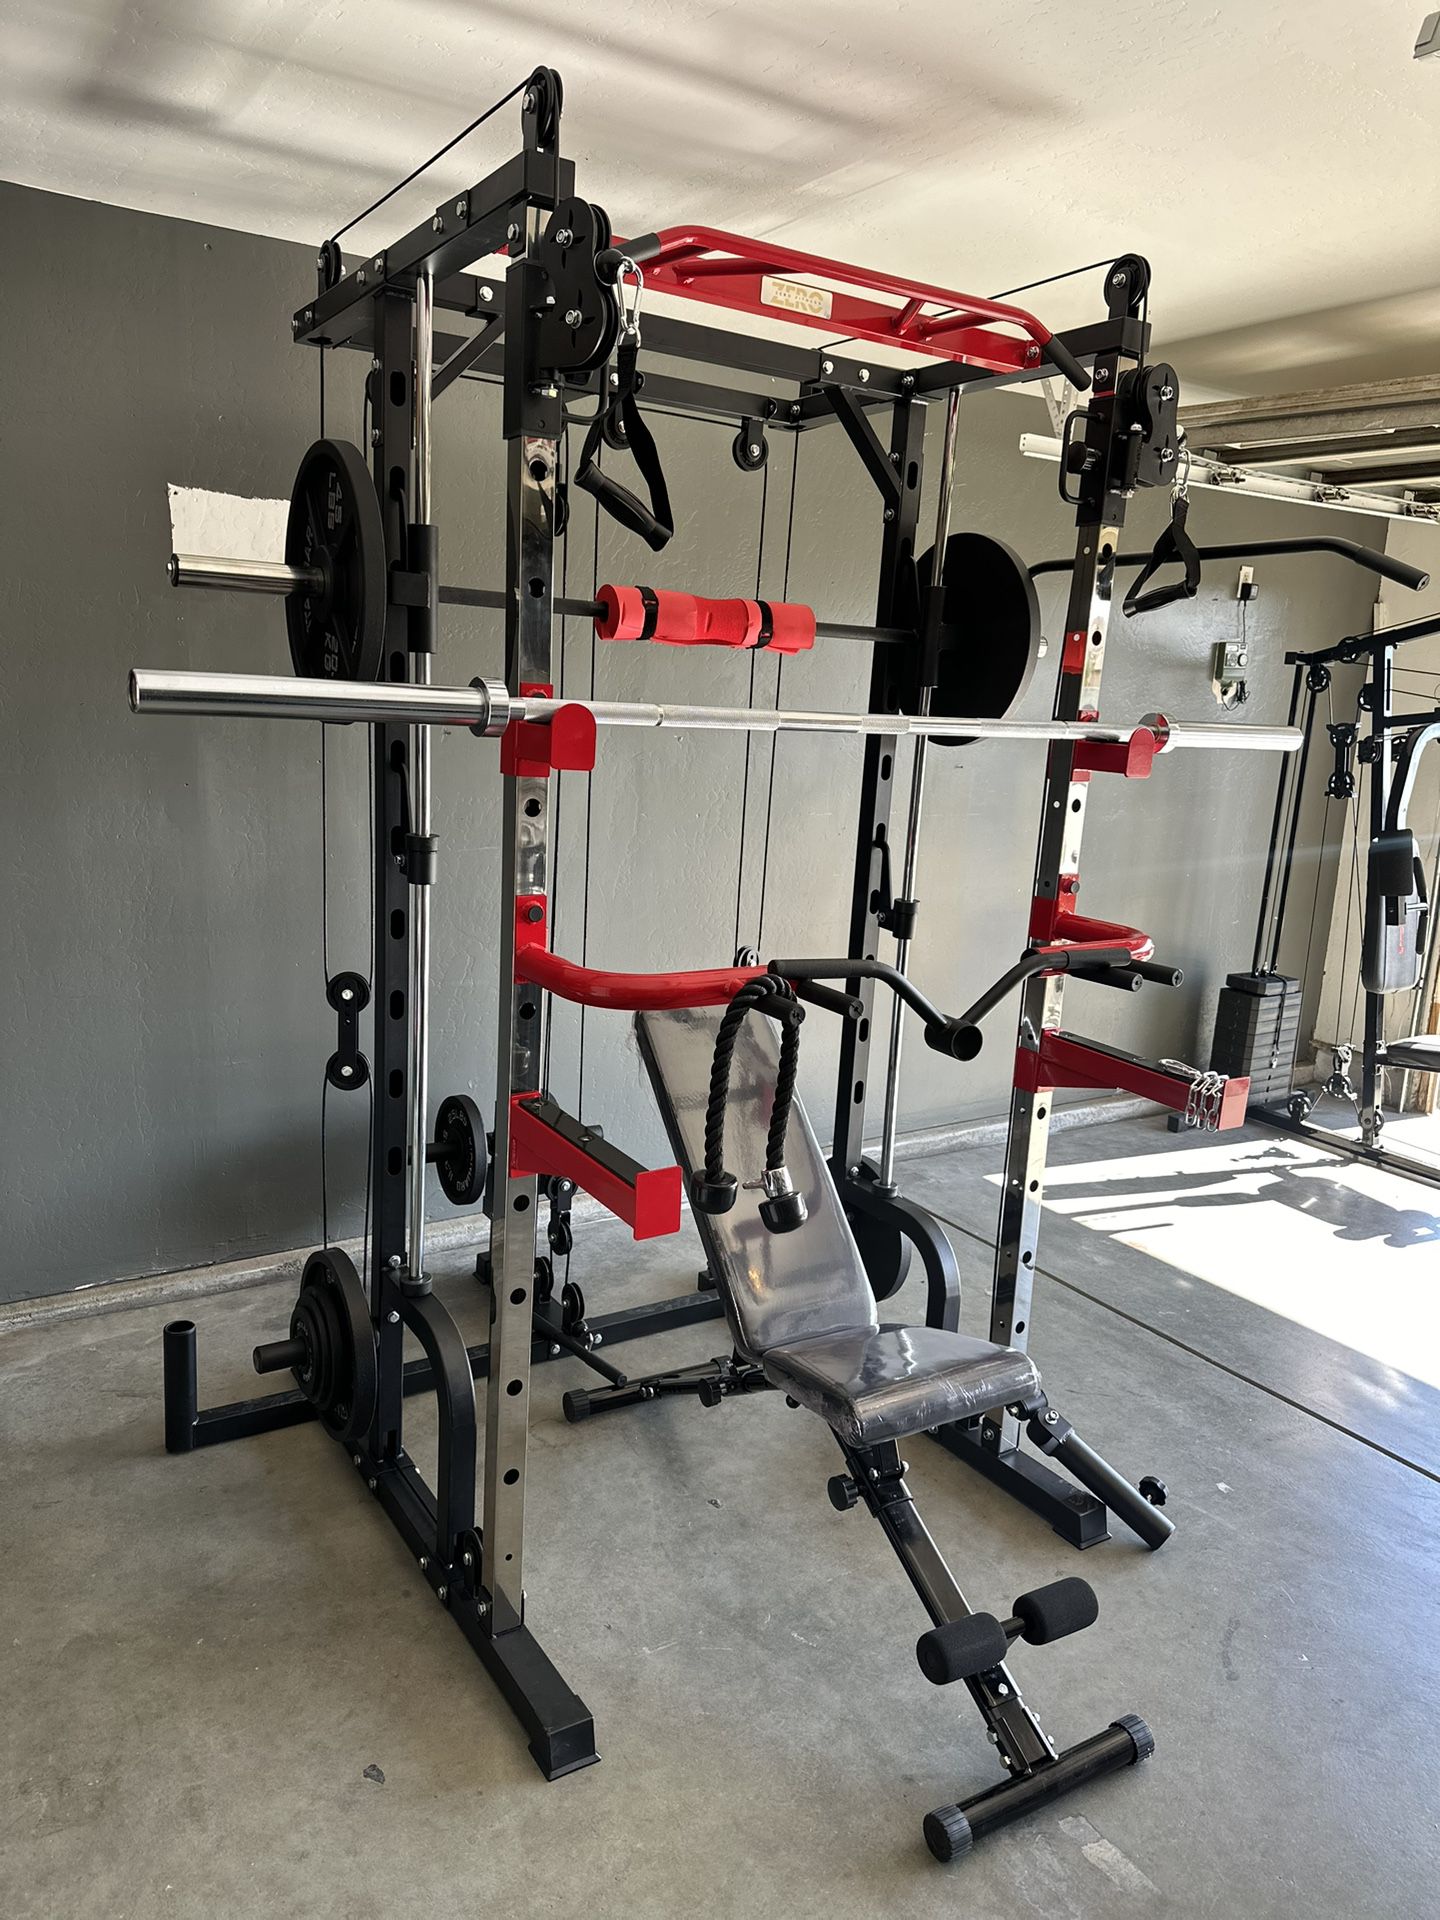 Smith Machine 100 | Adjustable Bench | 245lb Cast Iron Olympic Weights | 7ft Olympic Bar | Fitness | Gym Equipment | FREE DELIVERY 🚚 